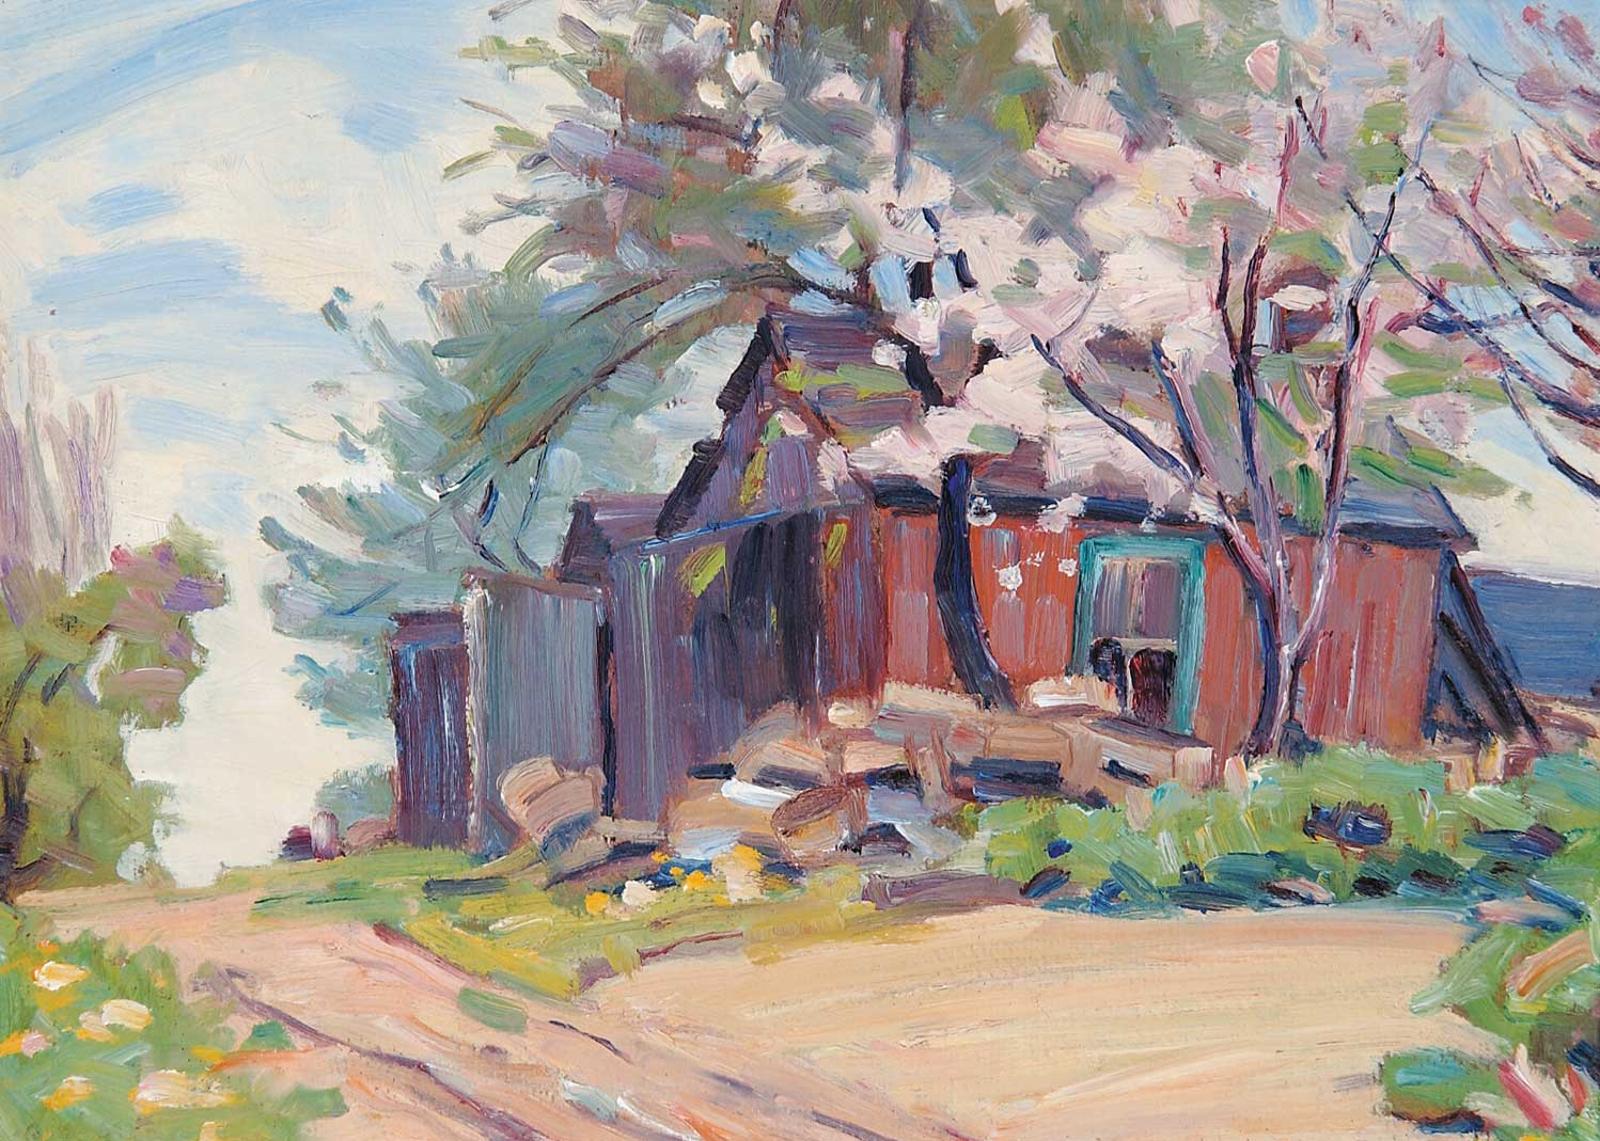 Bernice Fenwick Martin (1902-1999) - This Olde House in Cherry Blossom Time